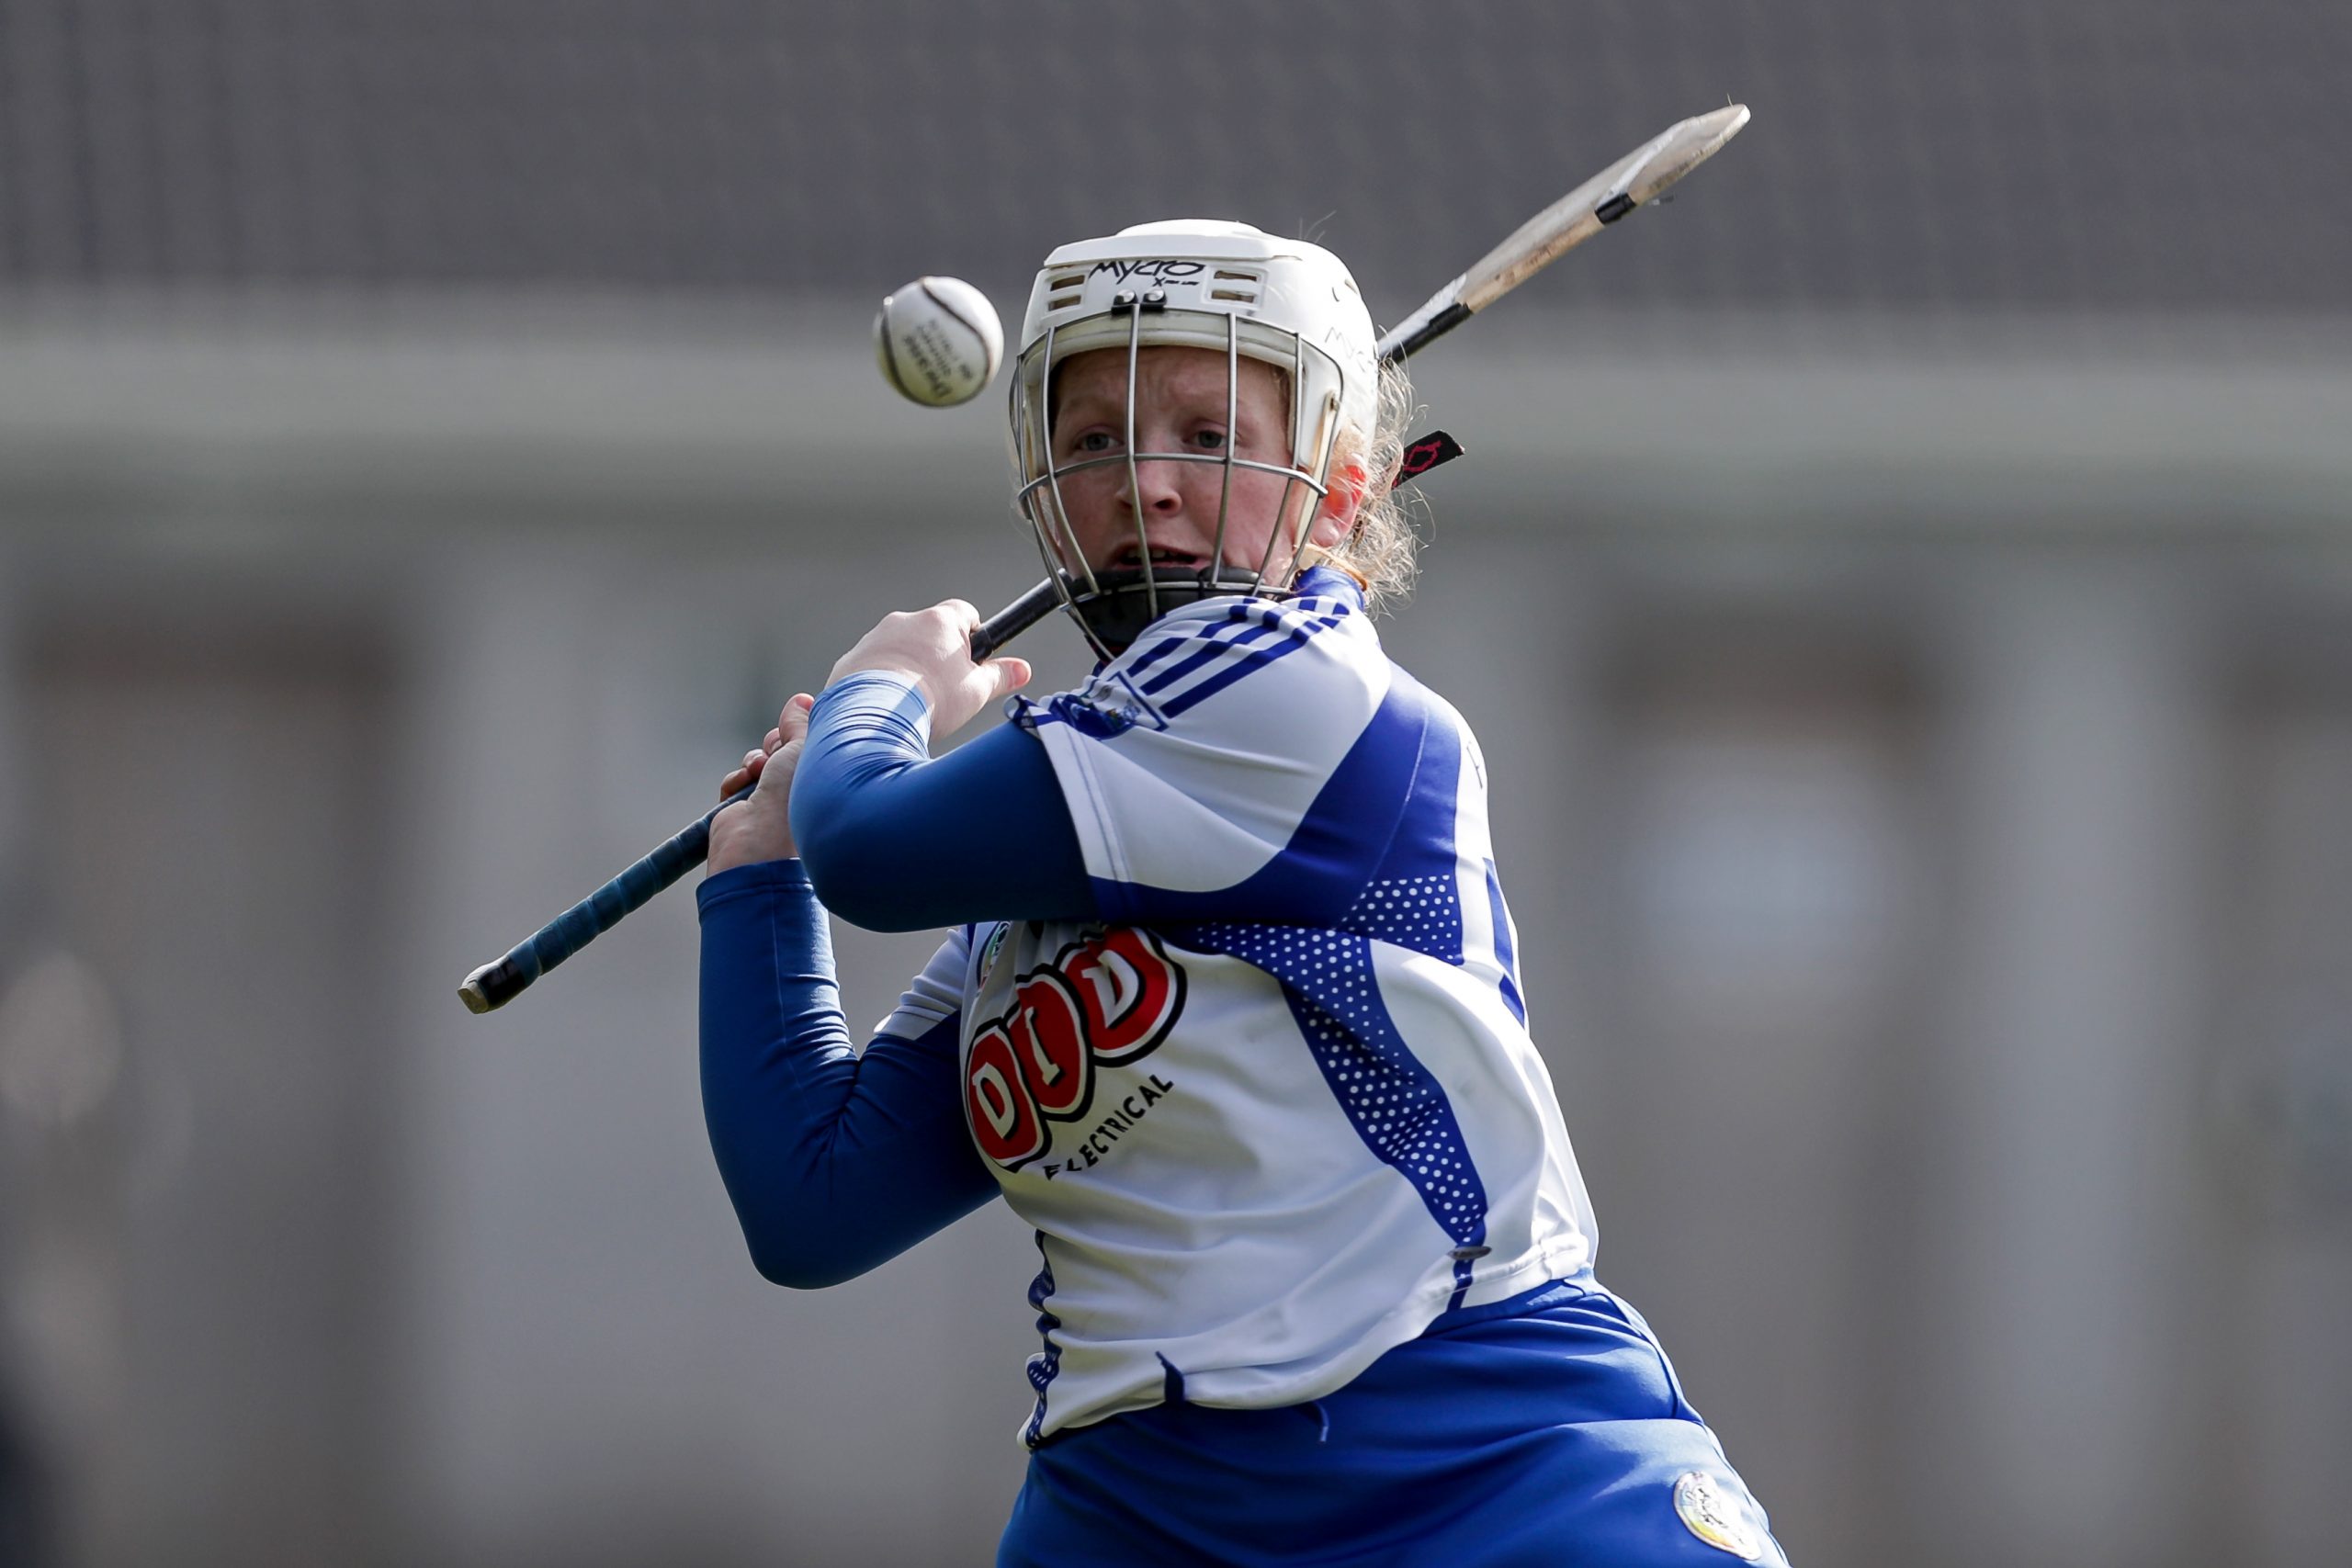 “Camogie kind of saved my life” – Waterford’s Brianna O’Regan